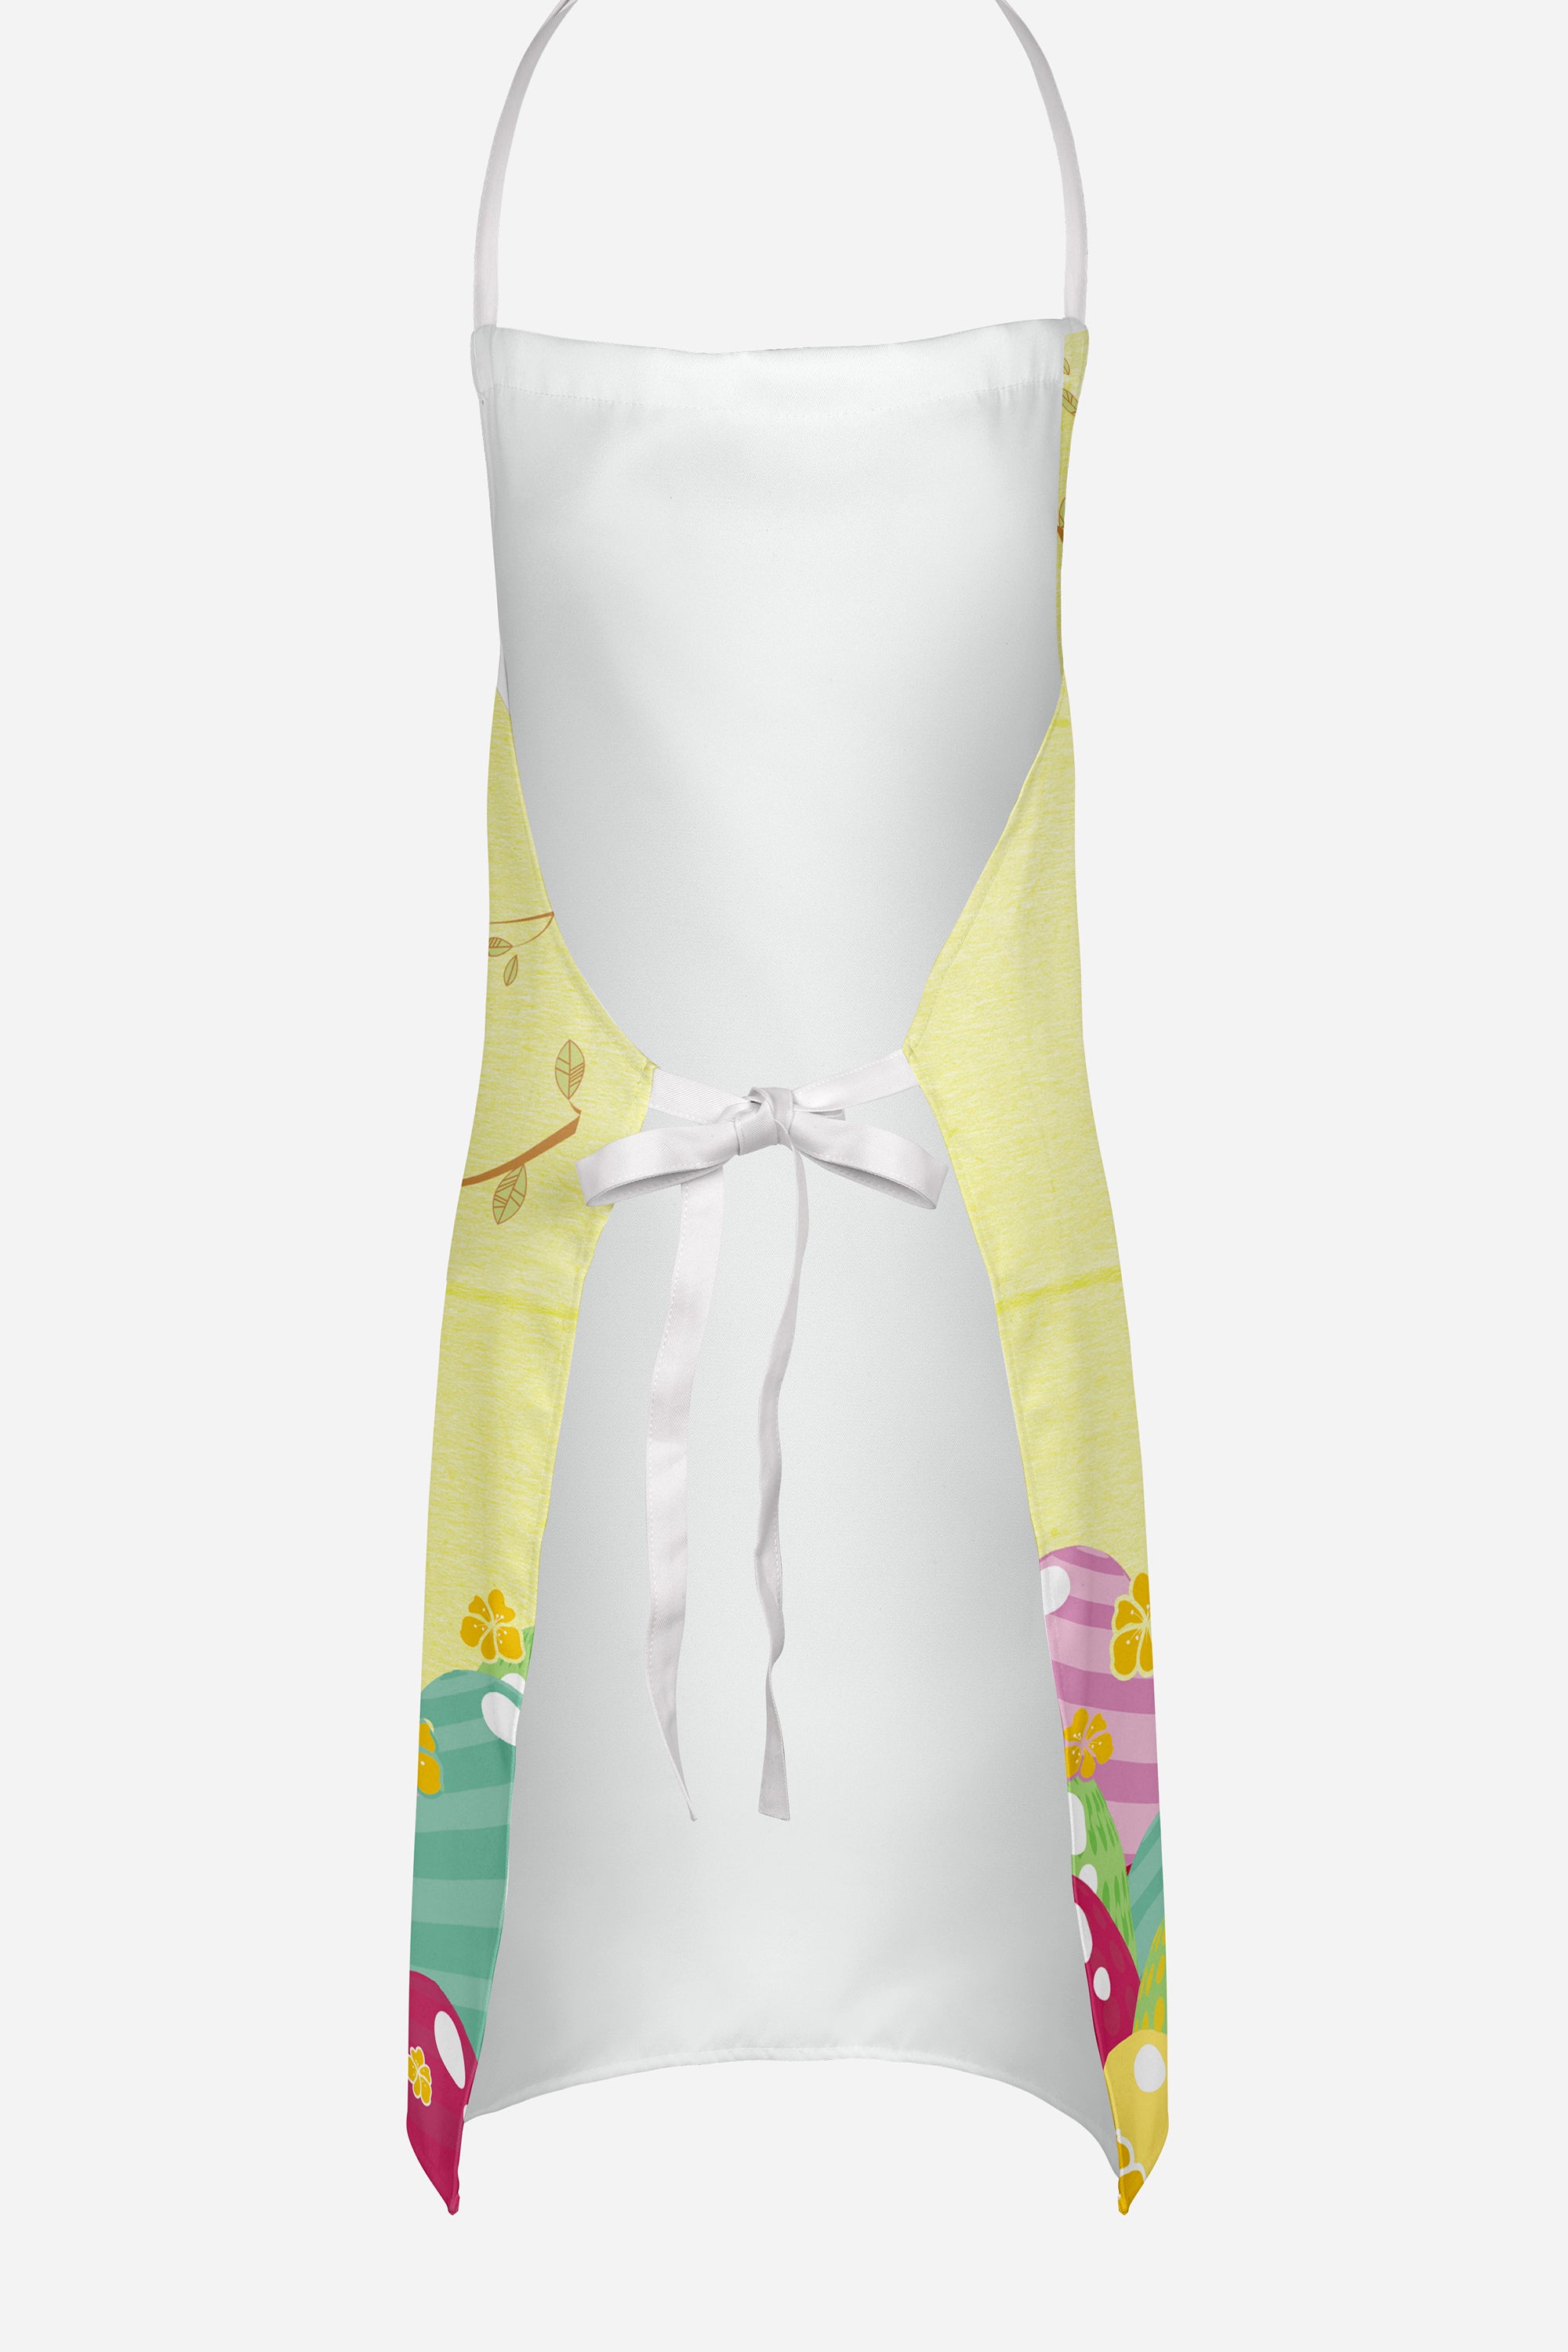 Easter Eggs Chinese Crested Cream Apron BB6113APRON